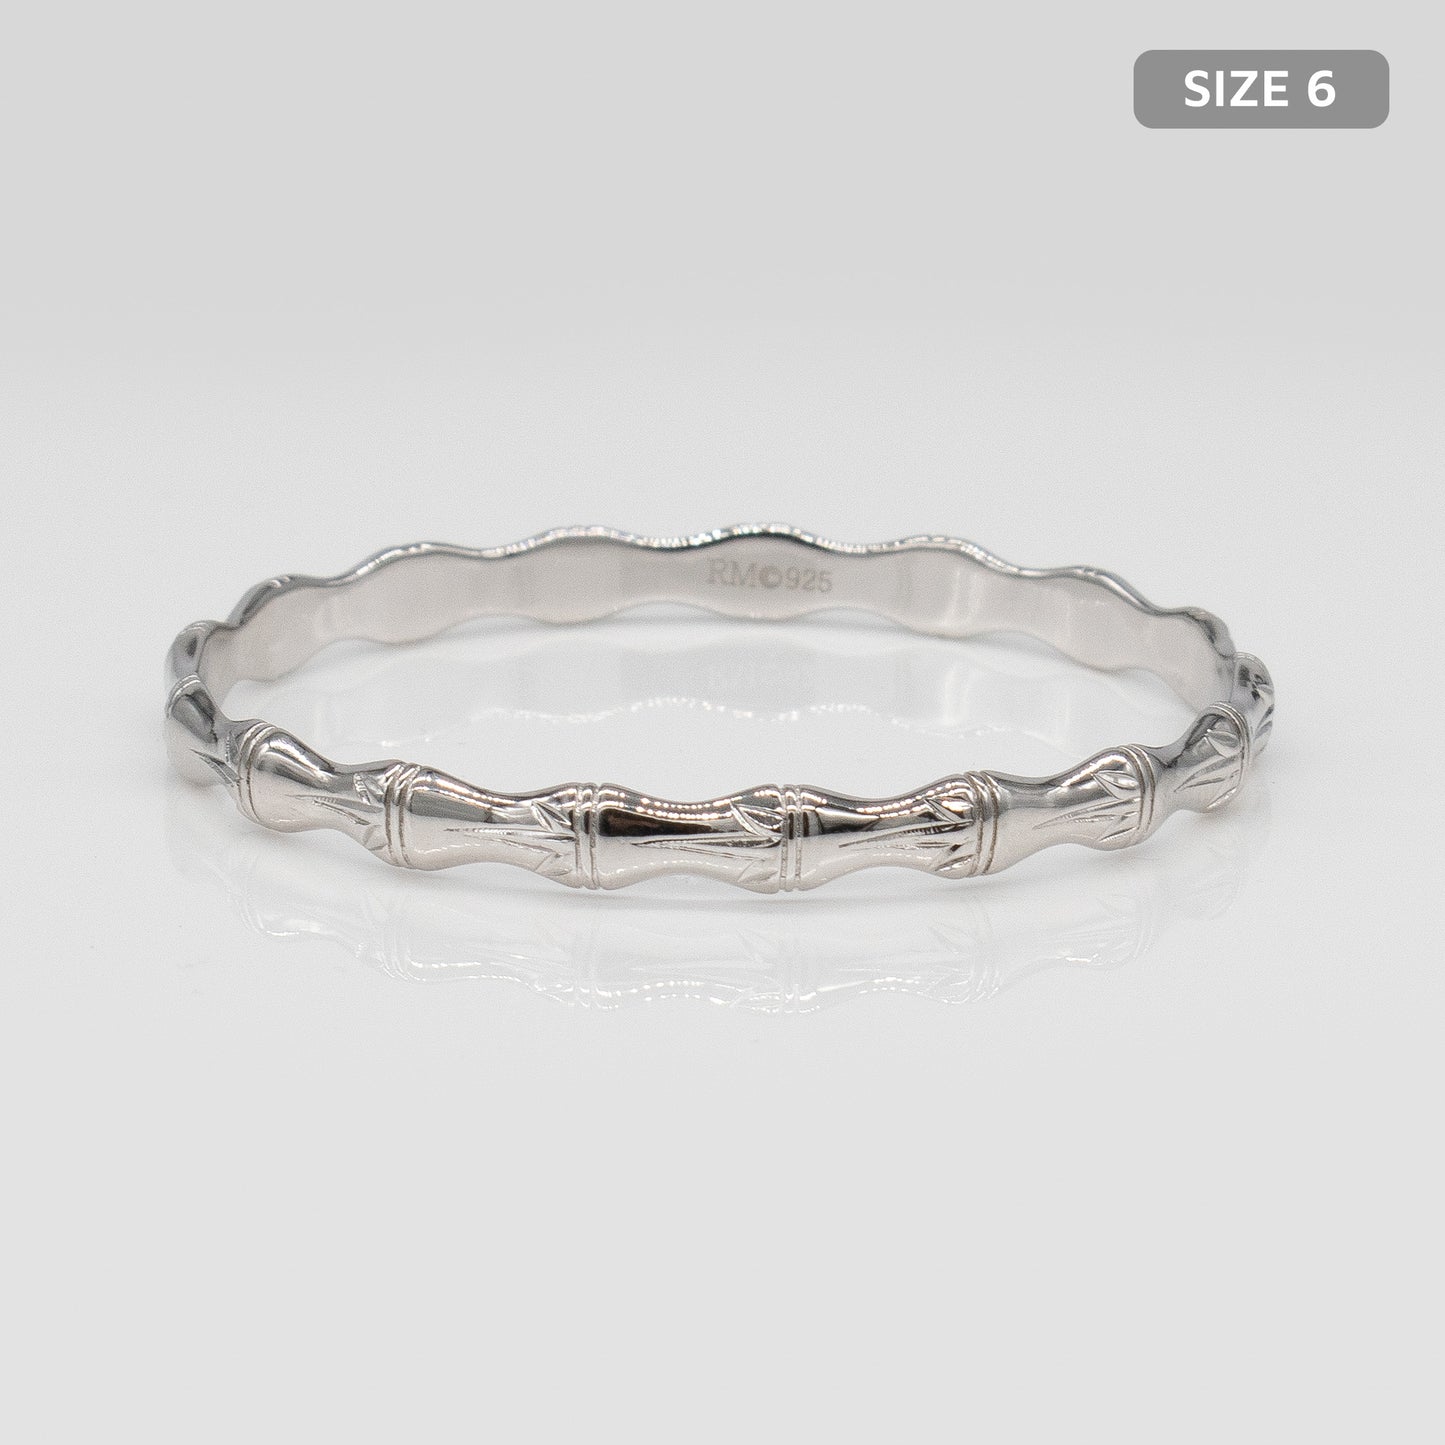 Kids Sterling Silver and Rhodium Bamboo Design Rosa Bangle. Size 6.